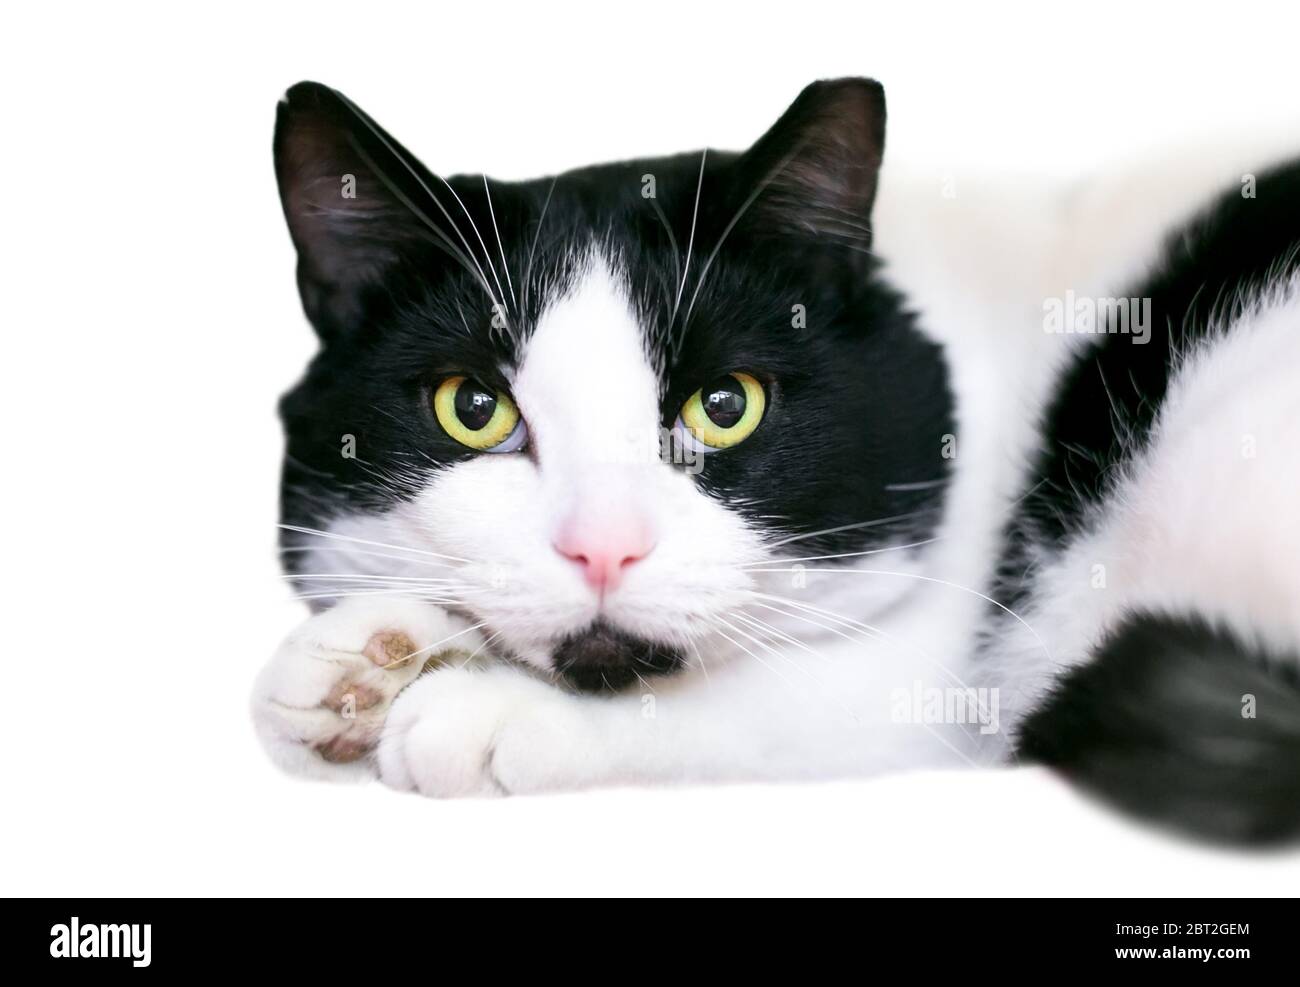 A black and white shorthair cat resting its head on its paws Stock Photo